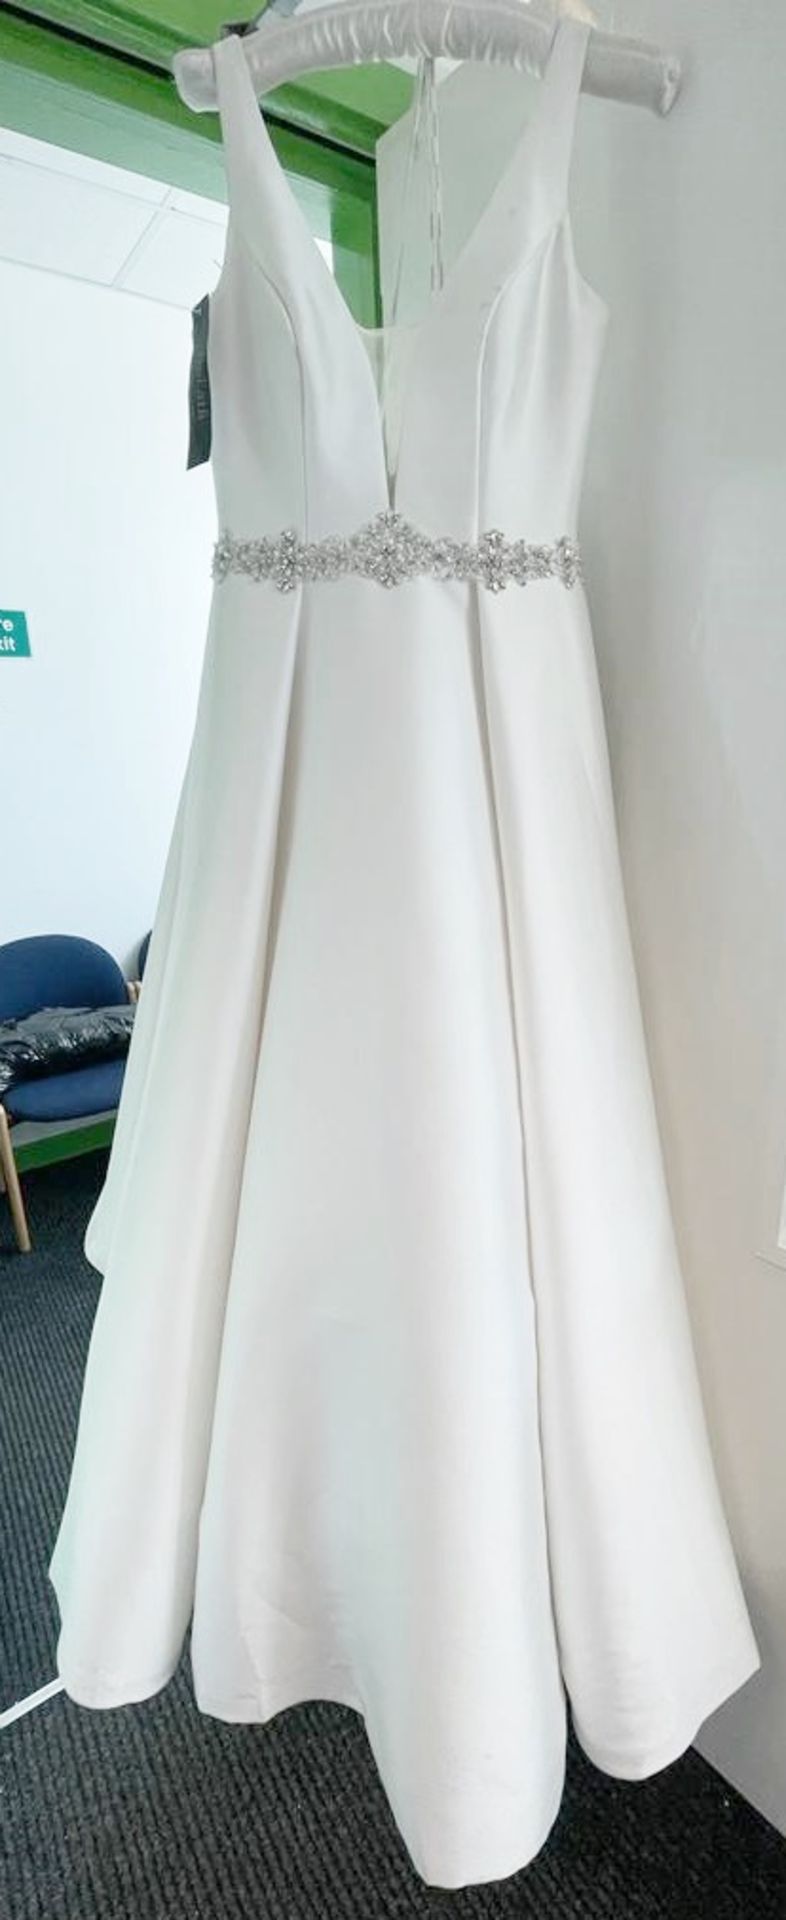 1 x PRONOVIAS 'Malena' Designer Princess Wedding Dress Bridal Gown, Featuring A Pleated Skirt And - Image 4 of 16